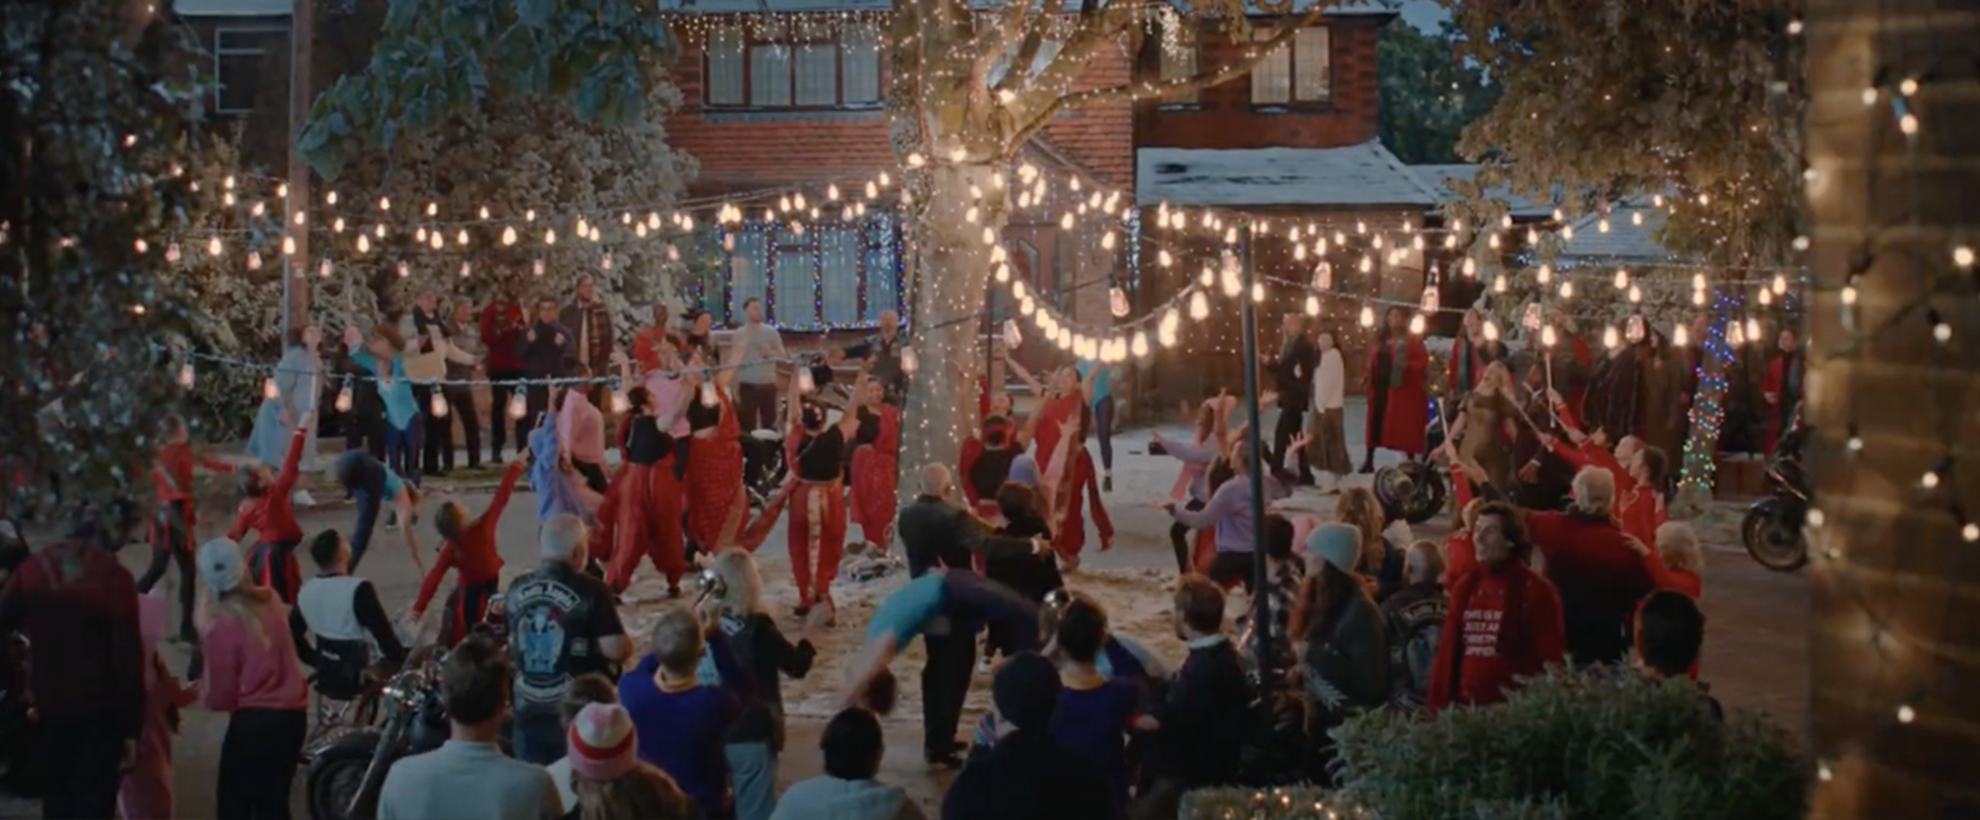 A large group of people dressed in red and holiday clothing celebrate outside under Christmas lights